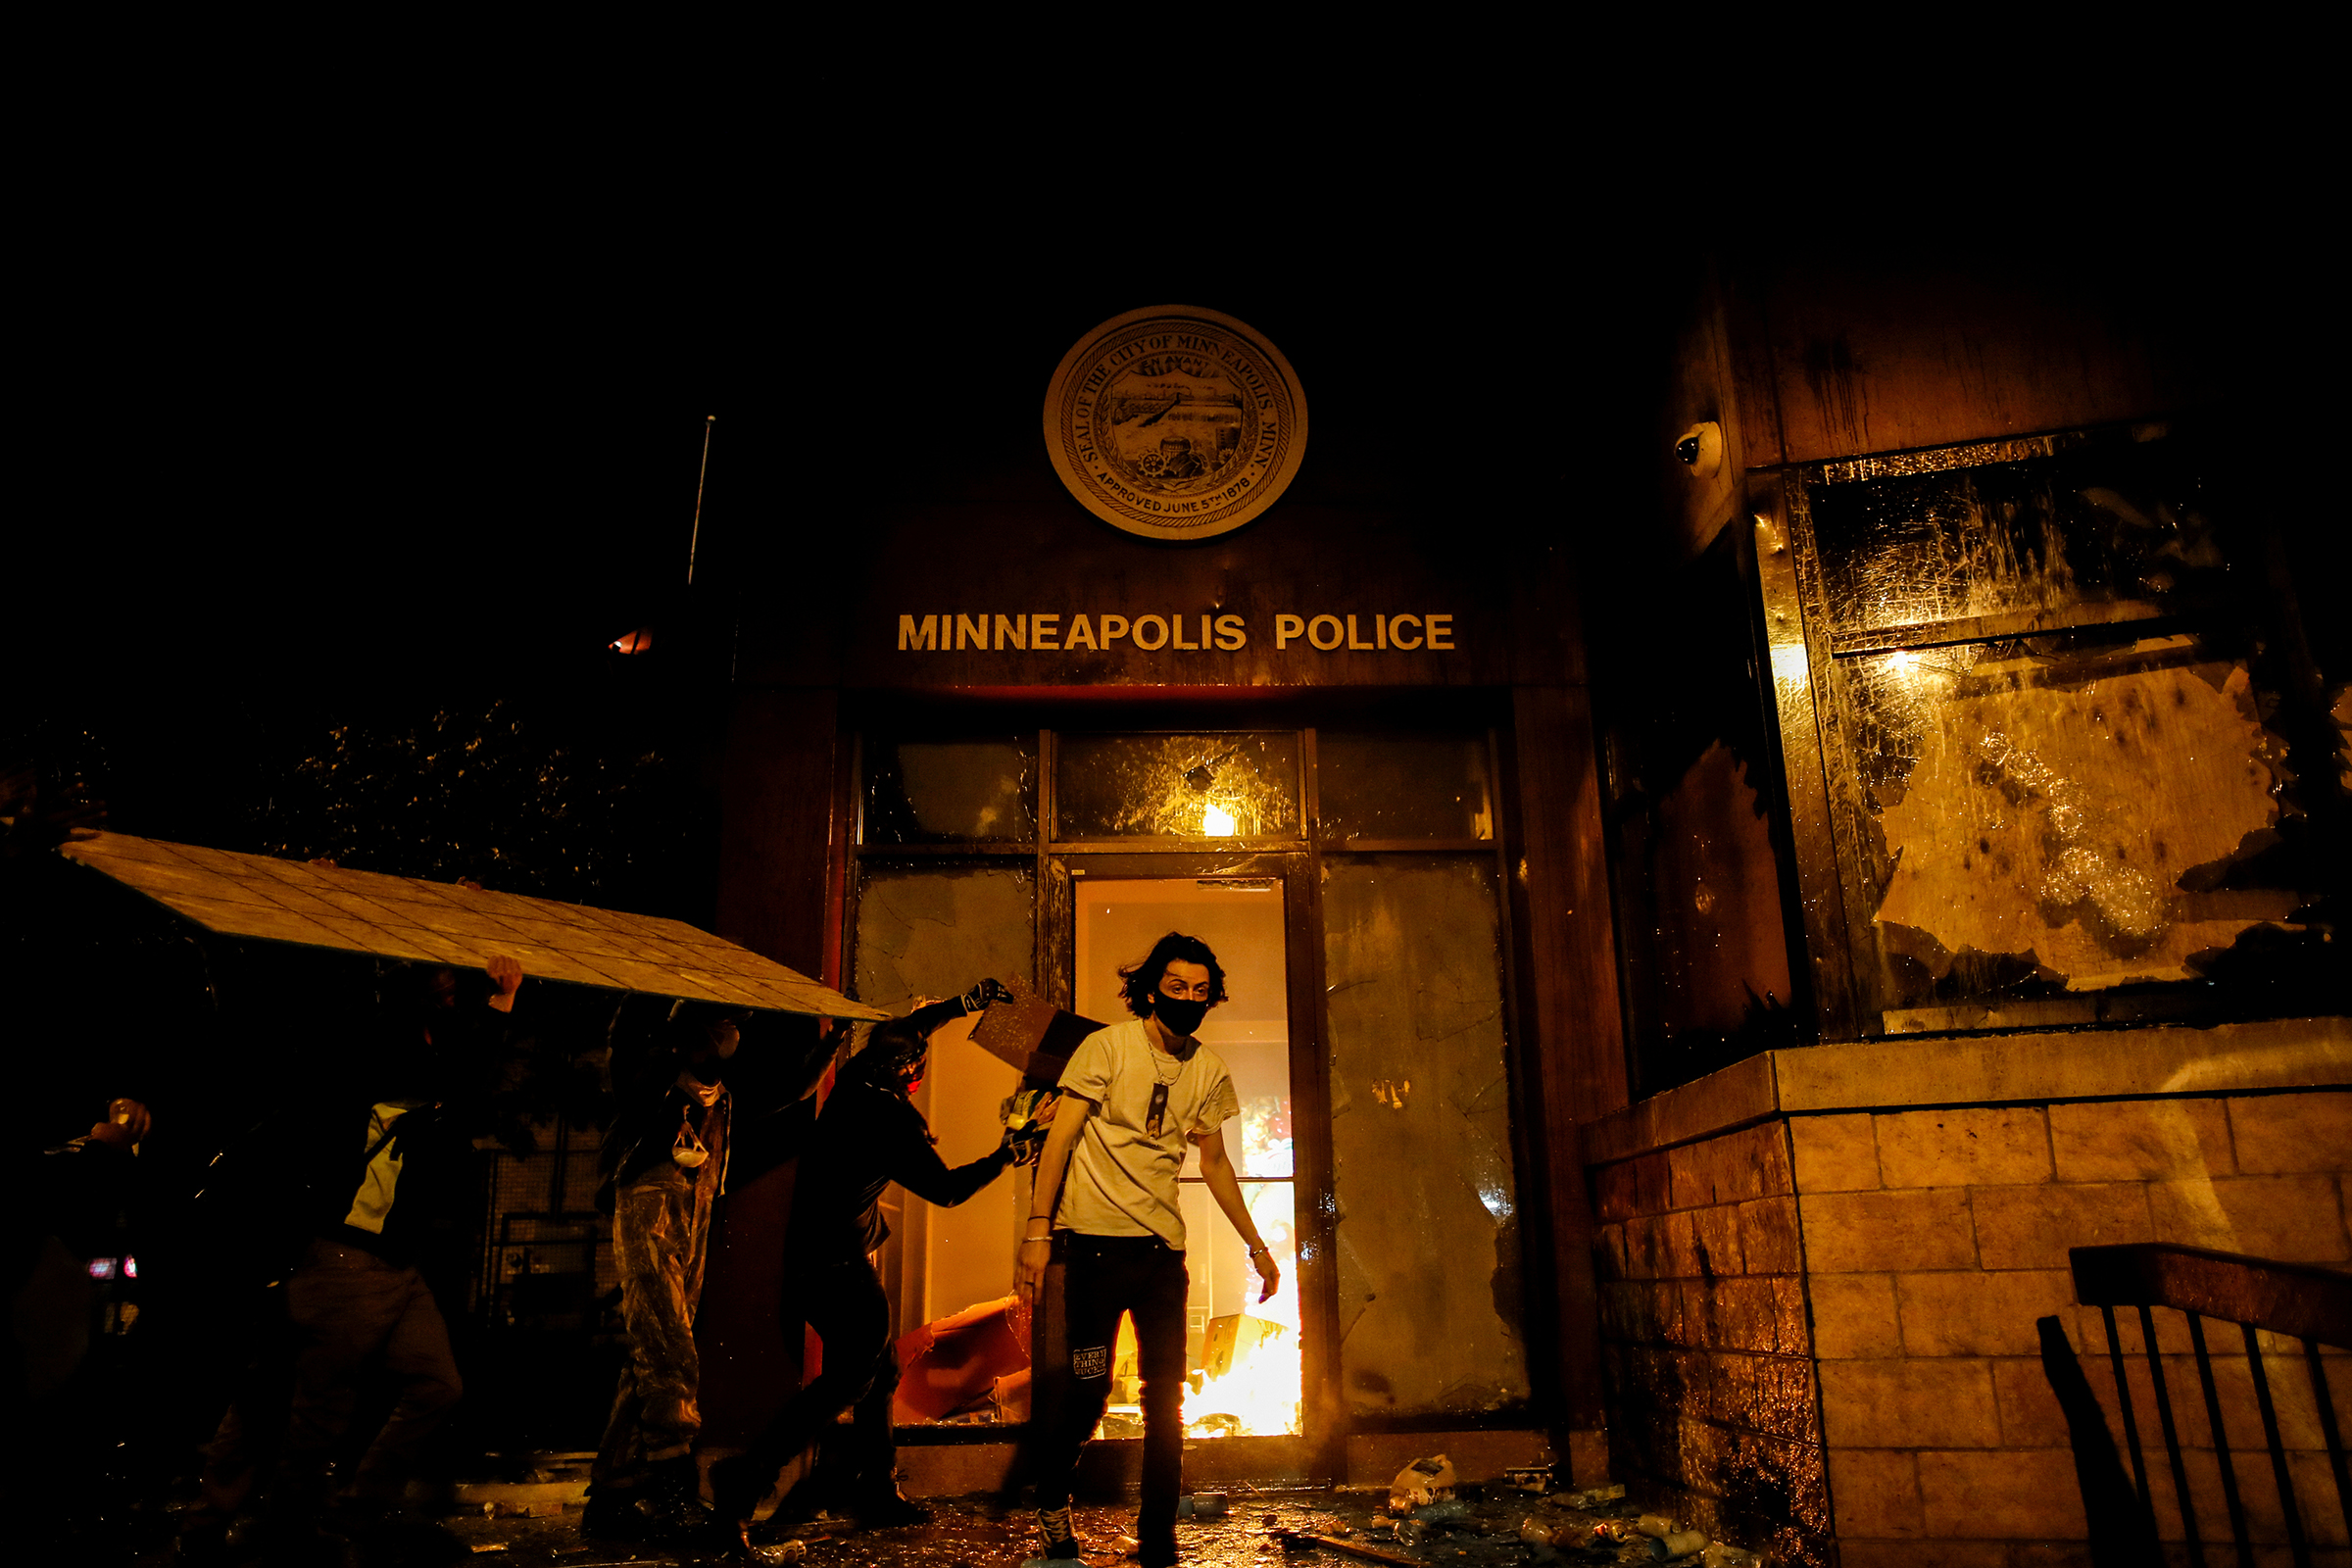 Protesters set fire to the entrance of a police station as demonstrations continue in Minneapolis